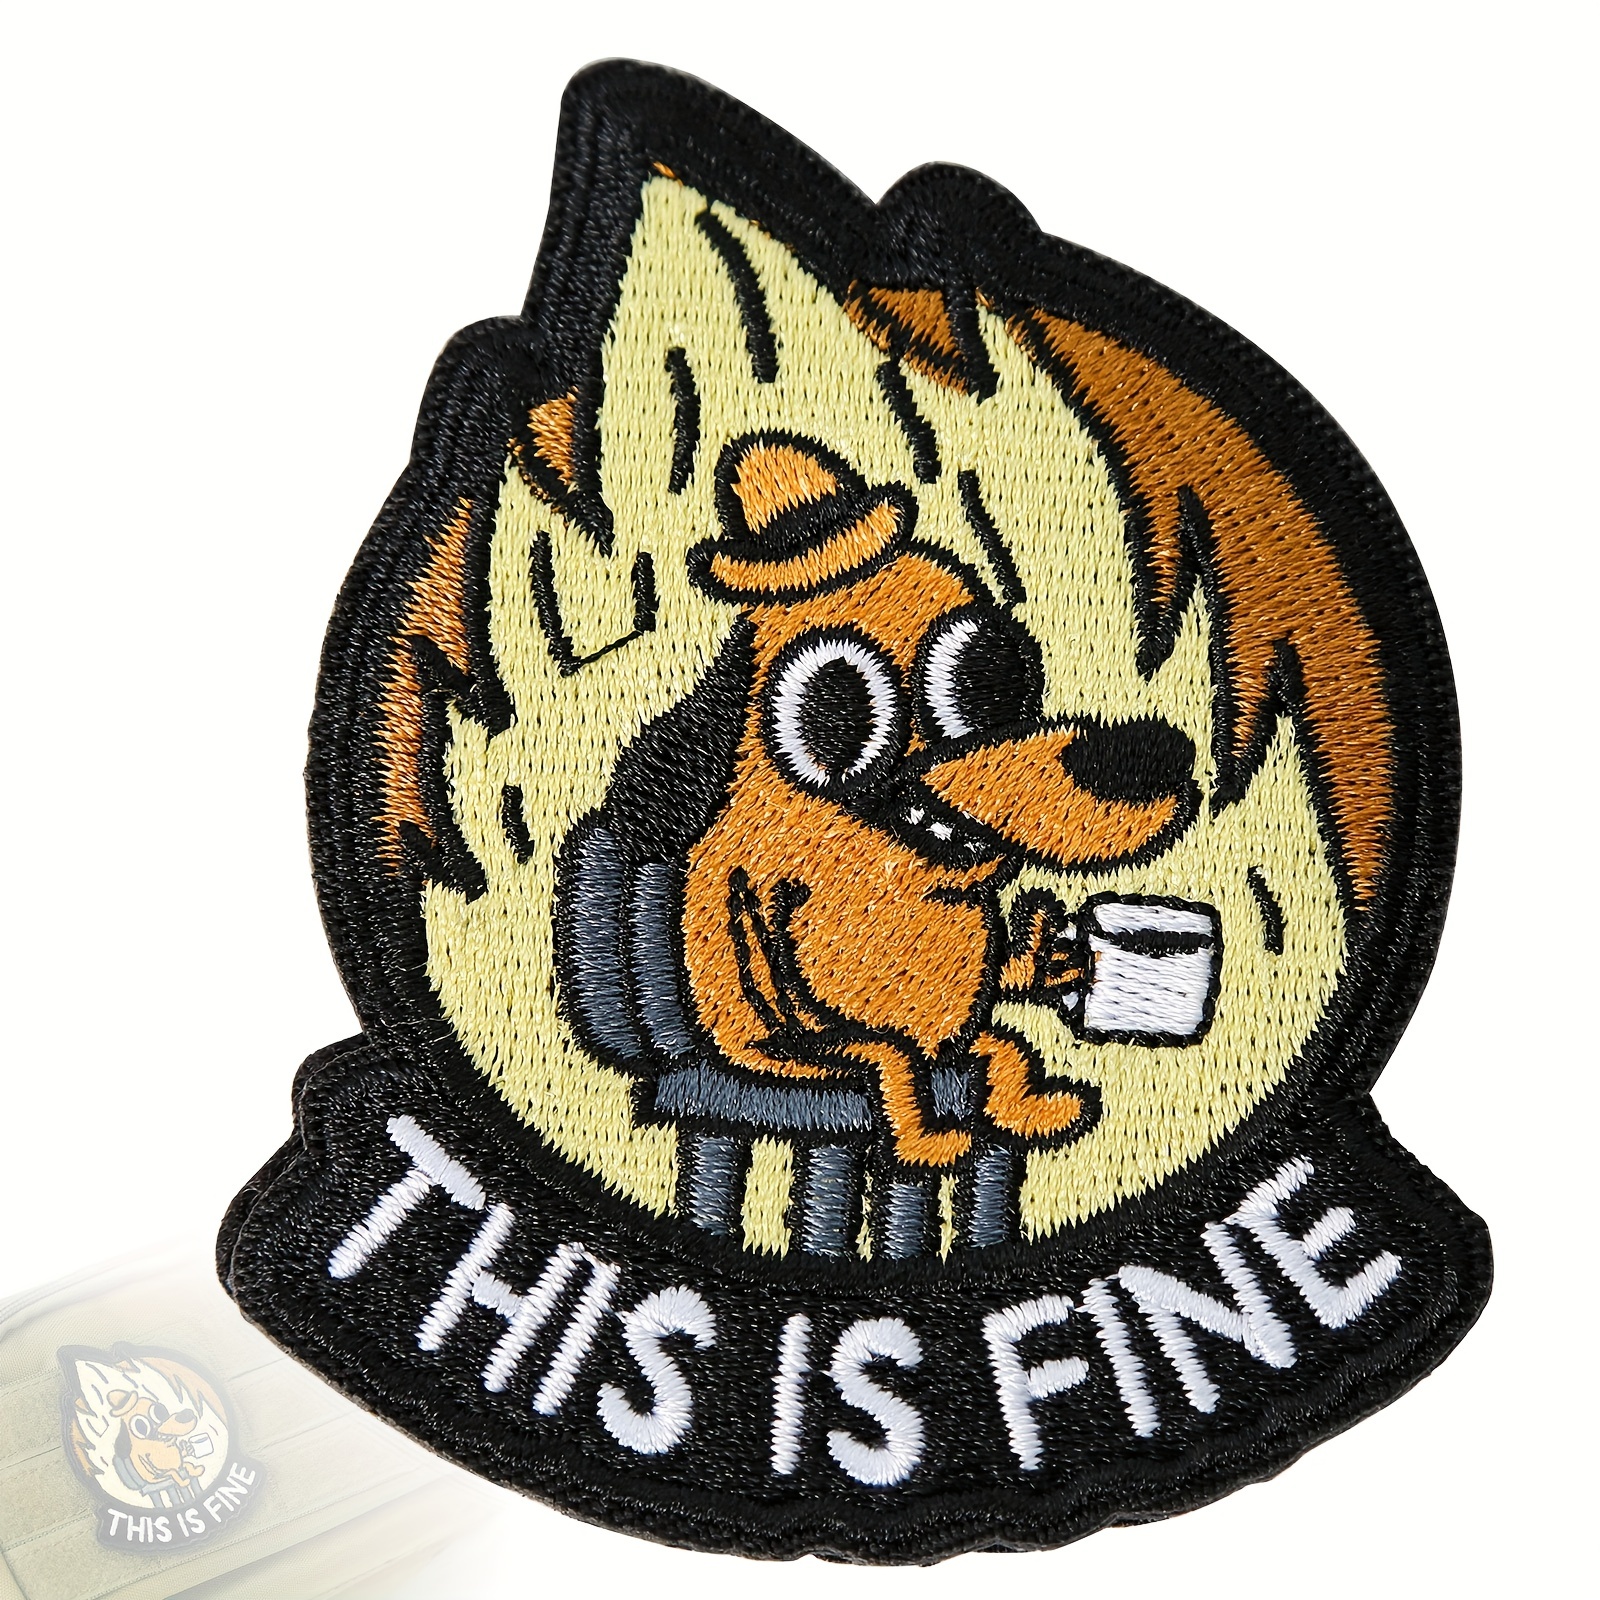  YJ PREMIUMS 9PC Funny Patches, Hook and Loop Tactical Morale  Patch for Backpack Vest, Cool Cute Small Embroidered Patche pacthes  ****This is Fine Dog